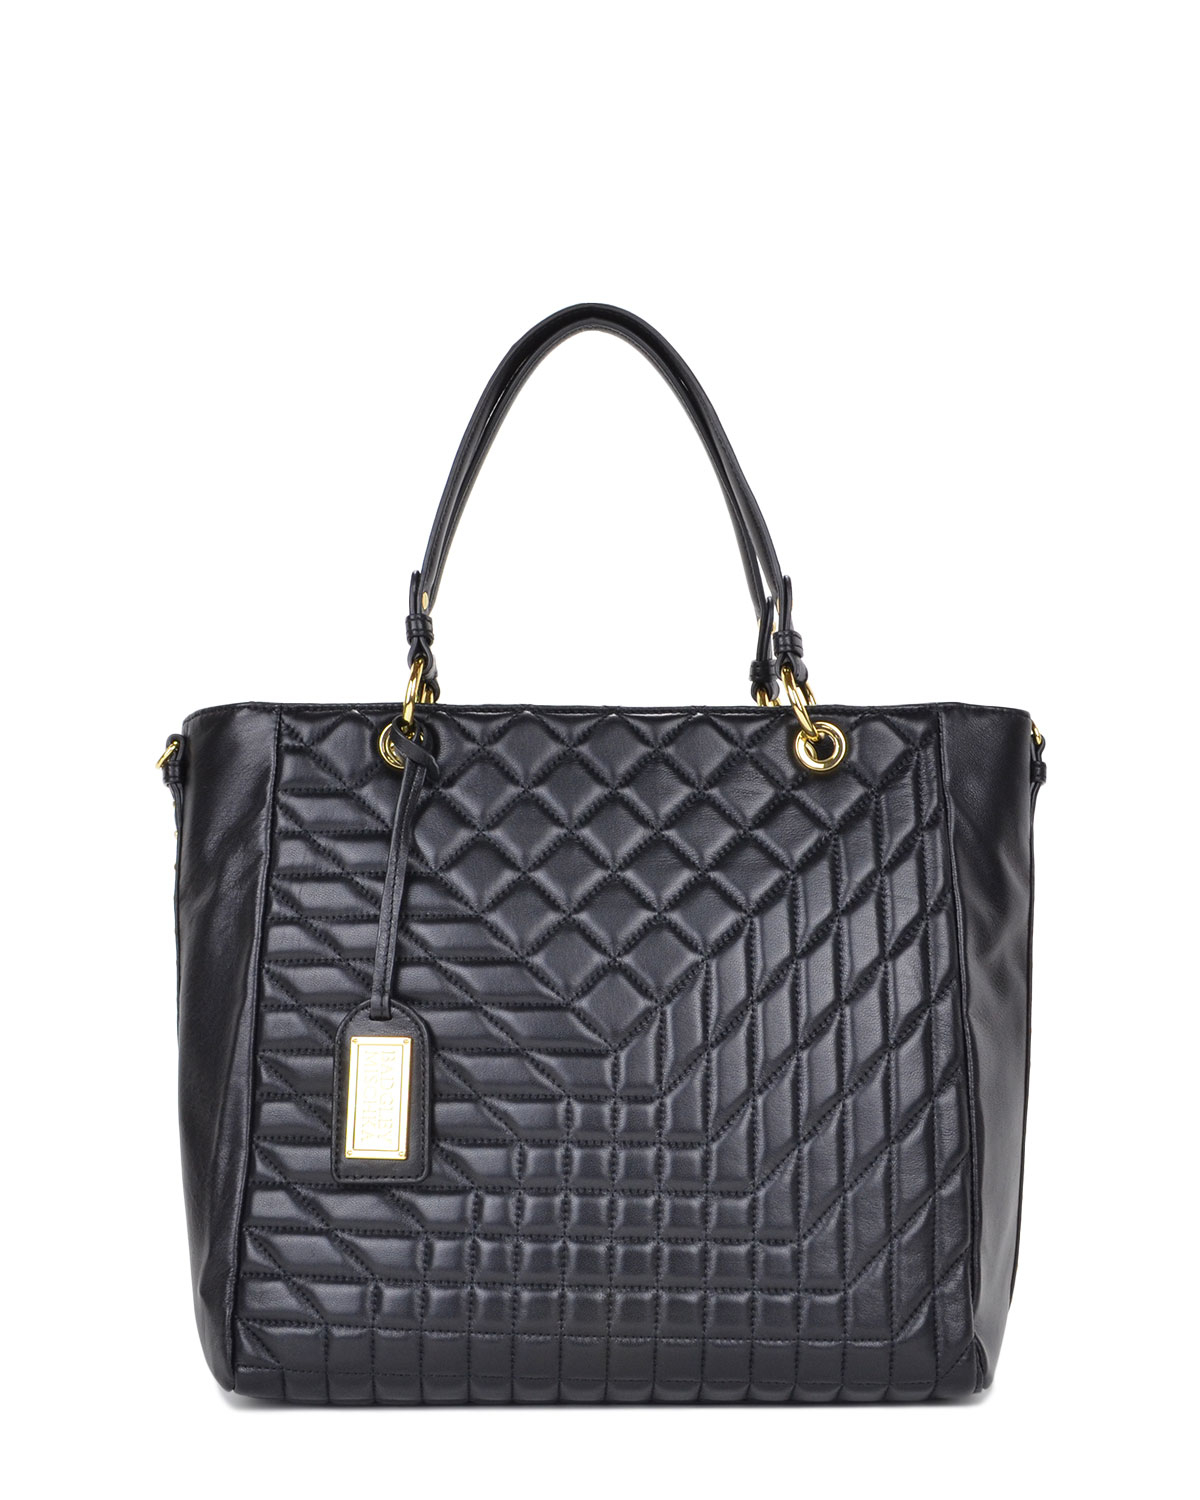 Badgley mischka Clarissa Quilted Leather Tote in Black | Lyst